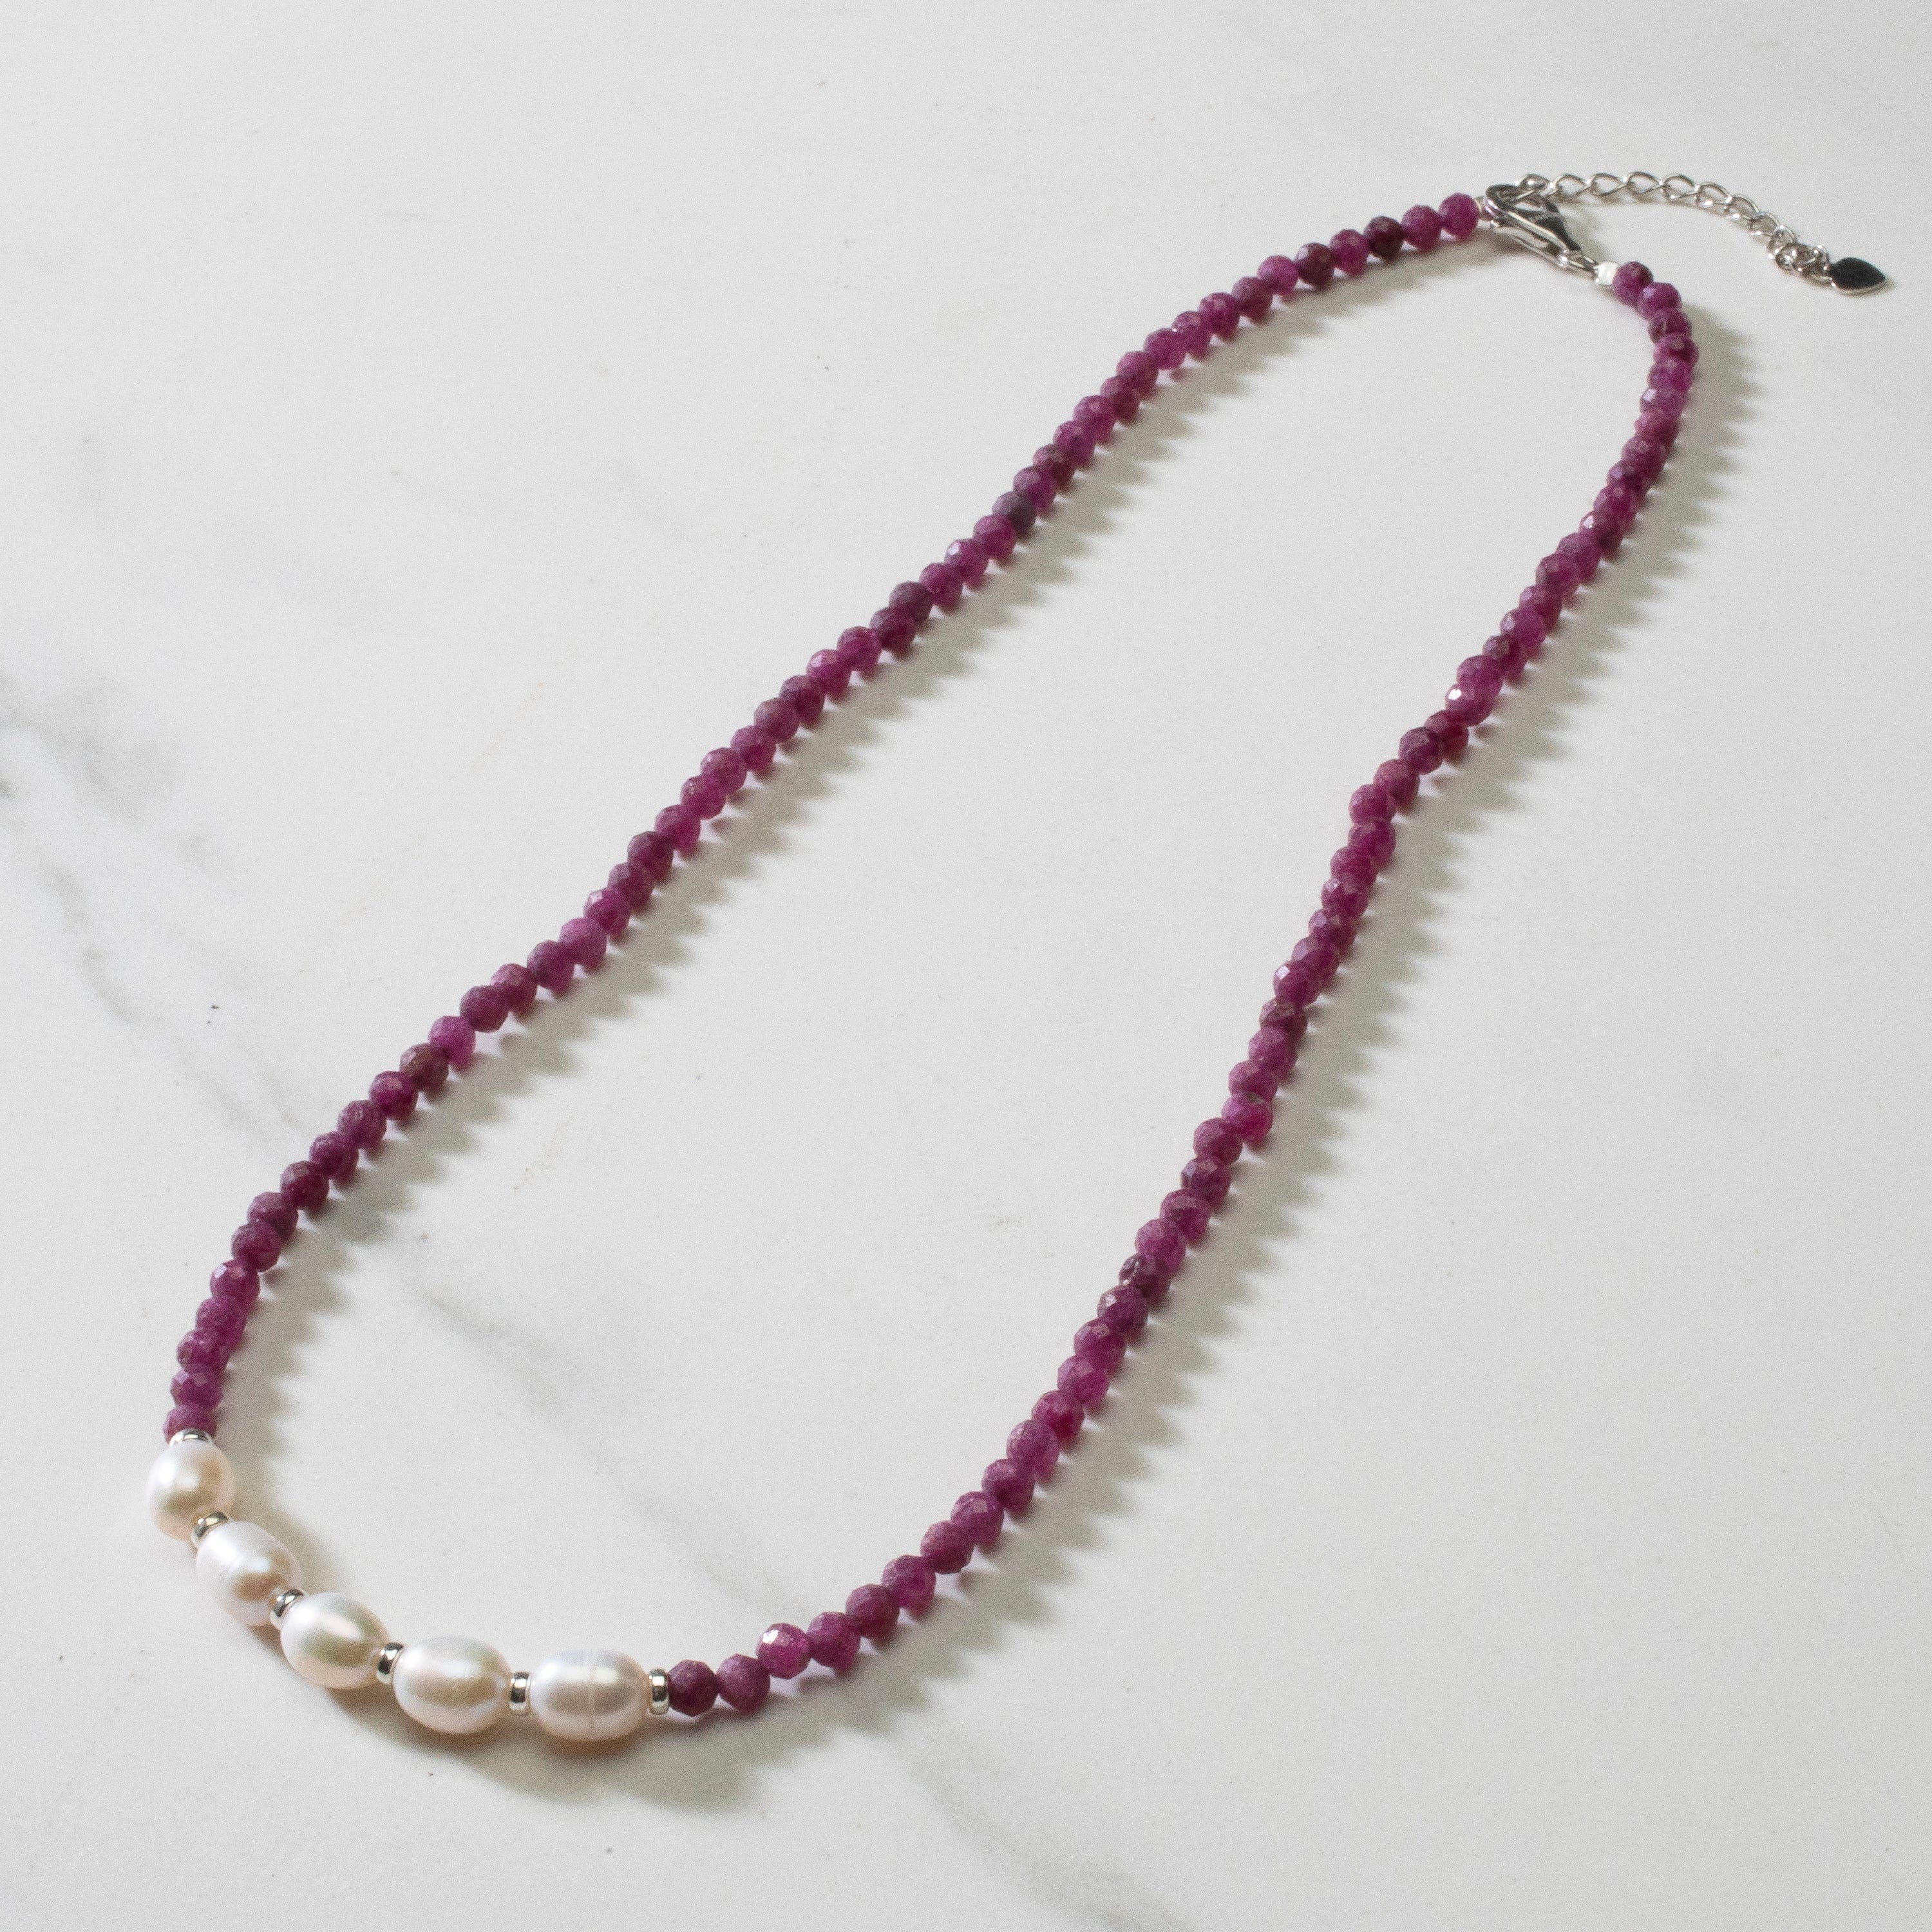 KALIFANO Jewelry 4mm Faceted Ruby Bead Necklace with 5 Pearls with 925 Silver Clasp 4MRB